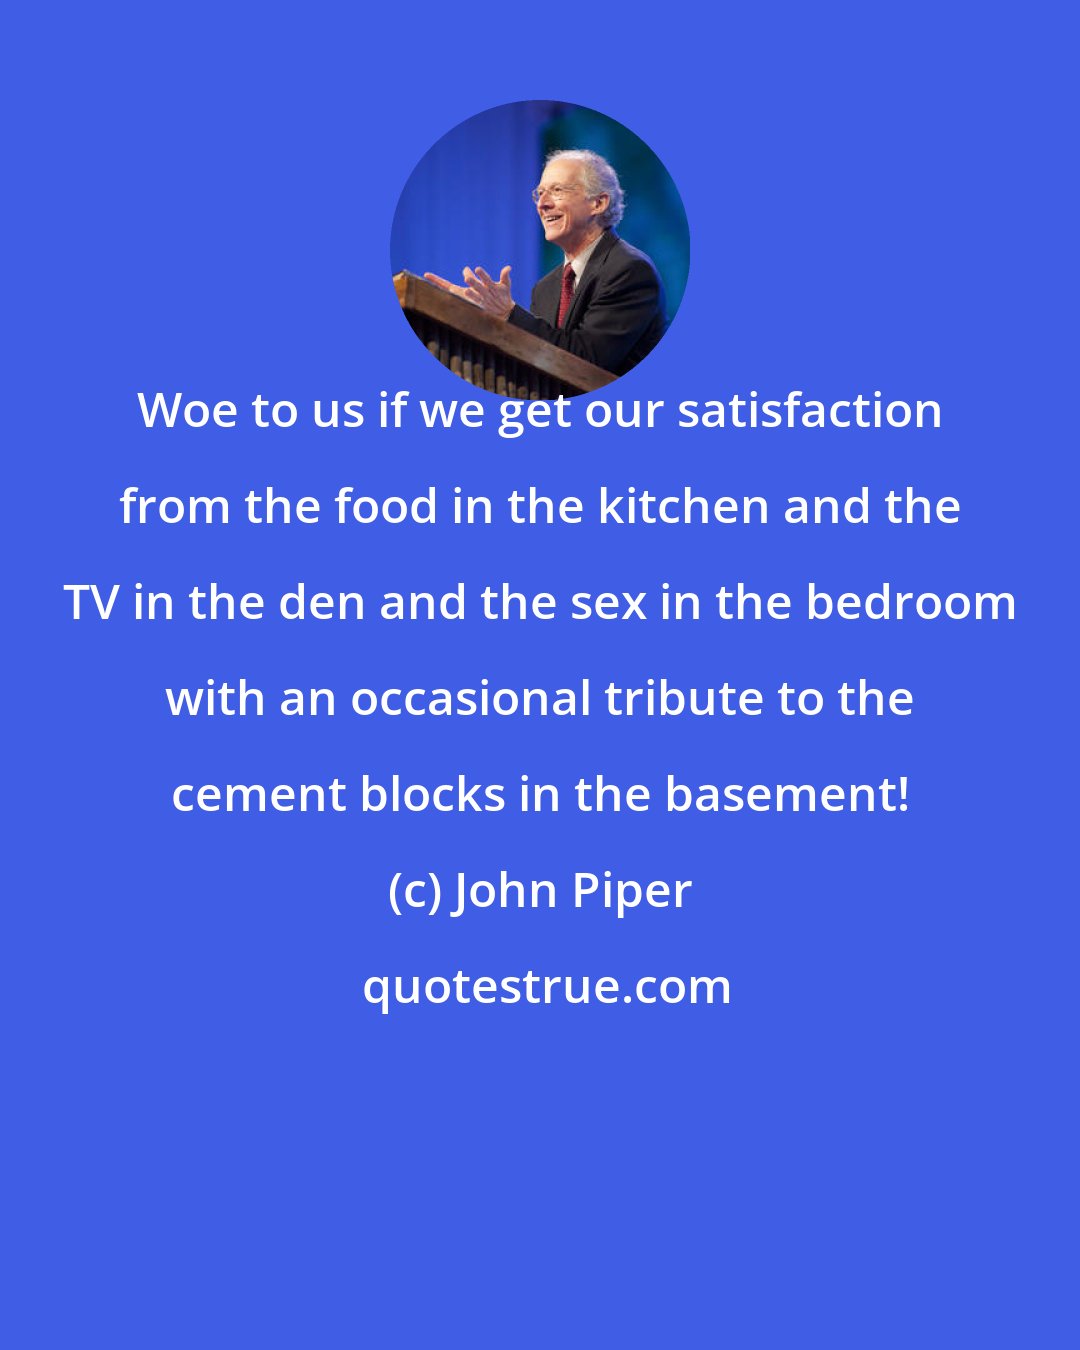 John Piper: Woe to us if we get our satisfaction from the food in the kitchen and the TV in the den and the sex in the bedroom with an occasional tribute to the cement blocks in the basement!